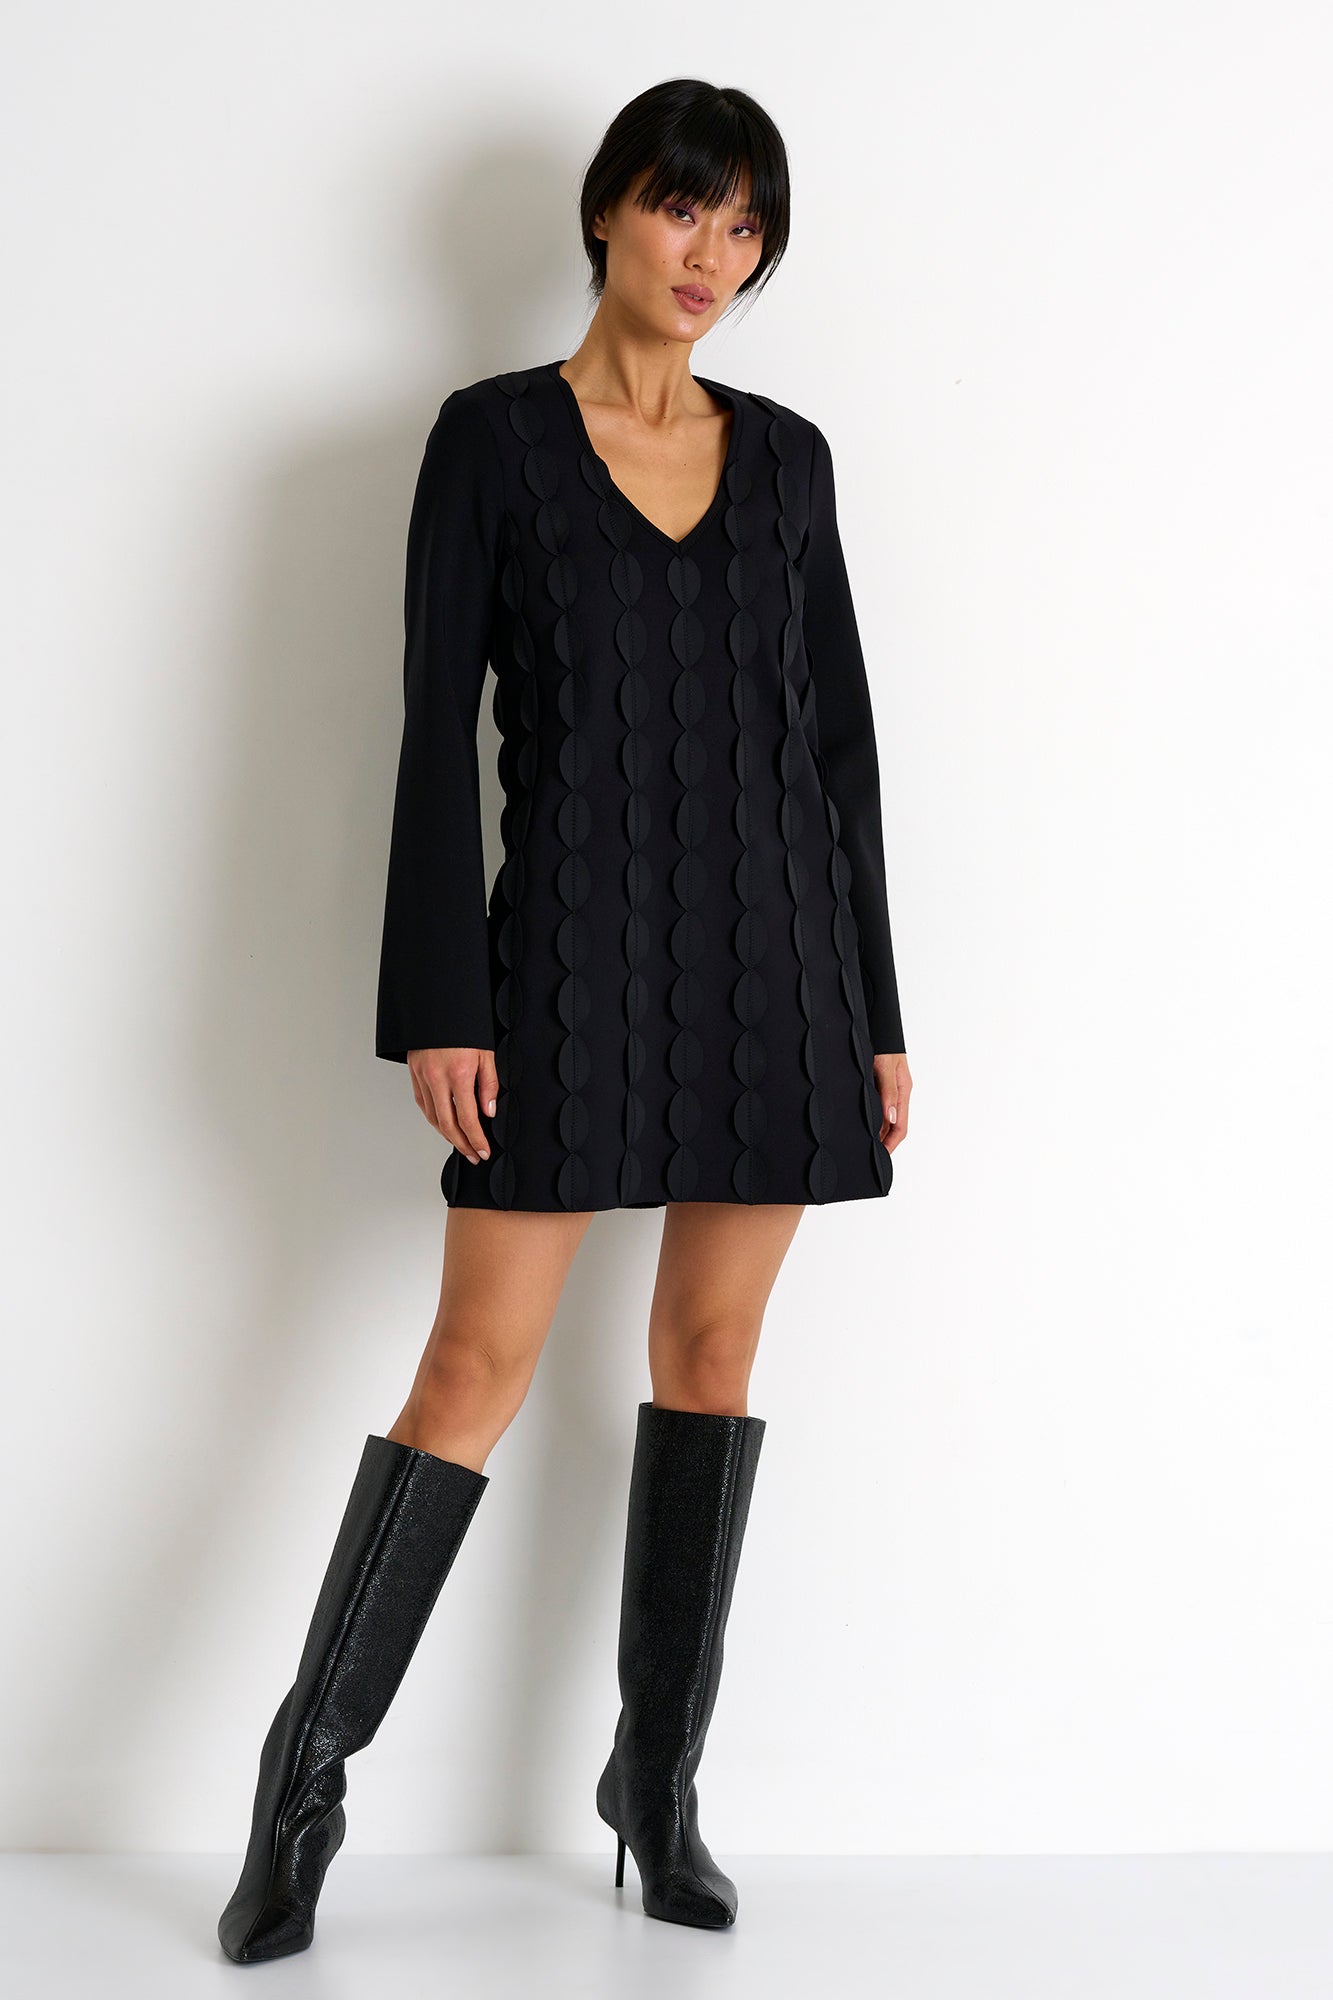 The Lydia Scallop Dress from Shan is designed with Italian 3D jersey fabric for a comfortable fit. 